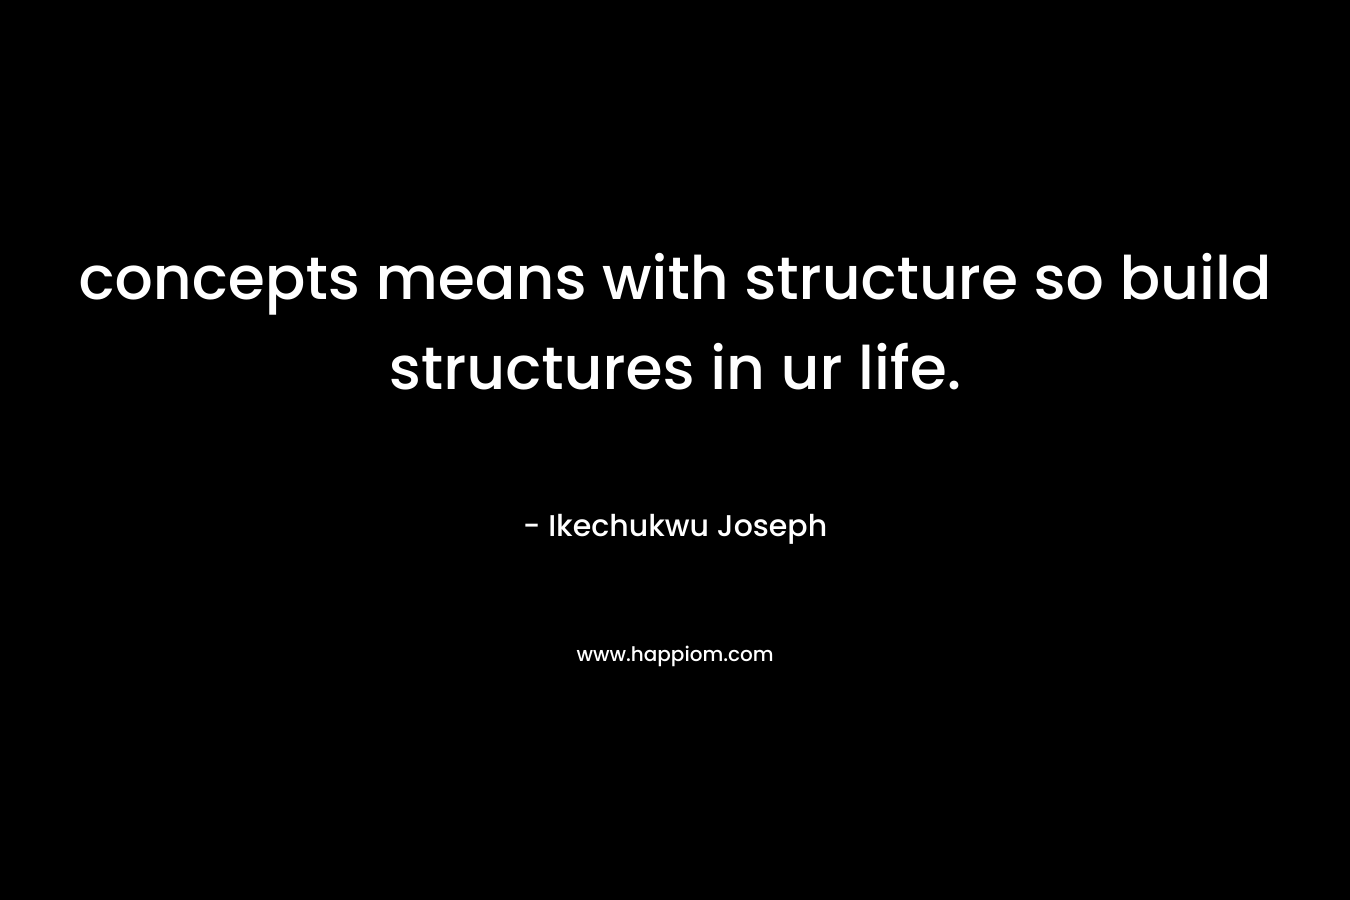 concepts means with structure so build structures in ur life. – Ikechukwu Joseph